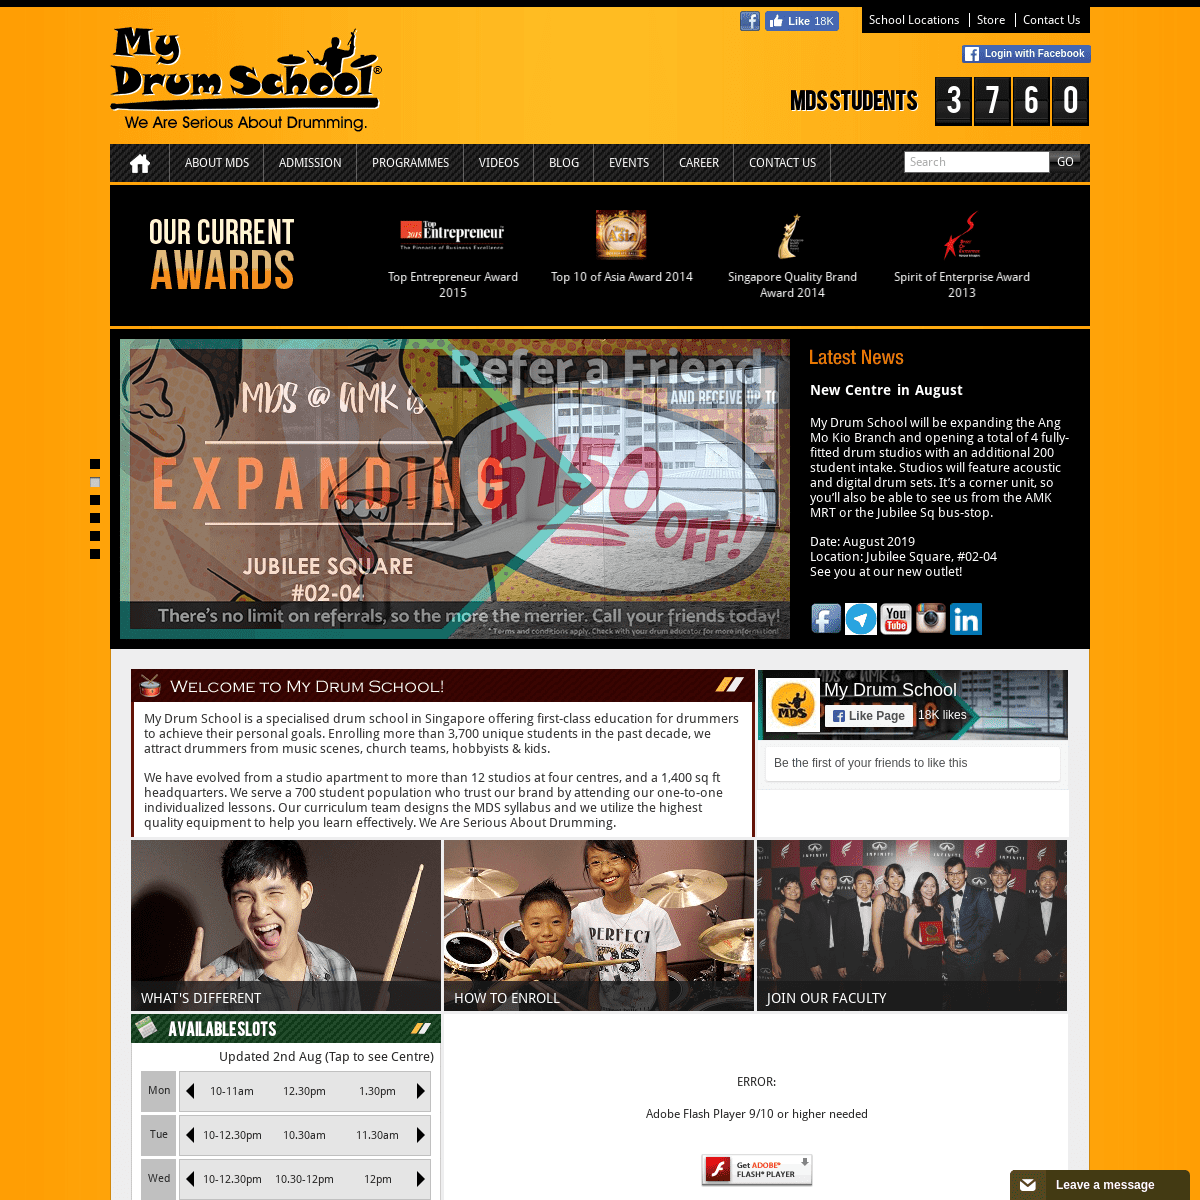 My Drum School - Singapore | We are serious about drumming.